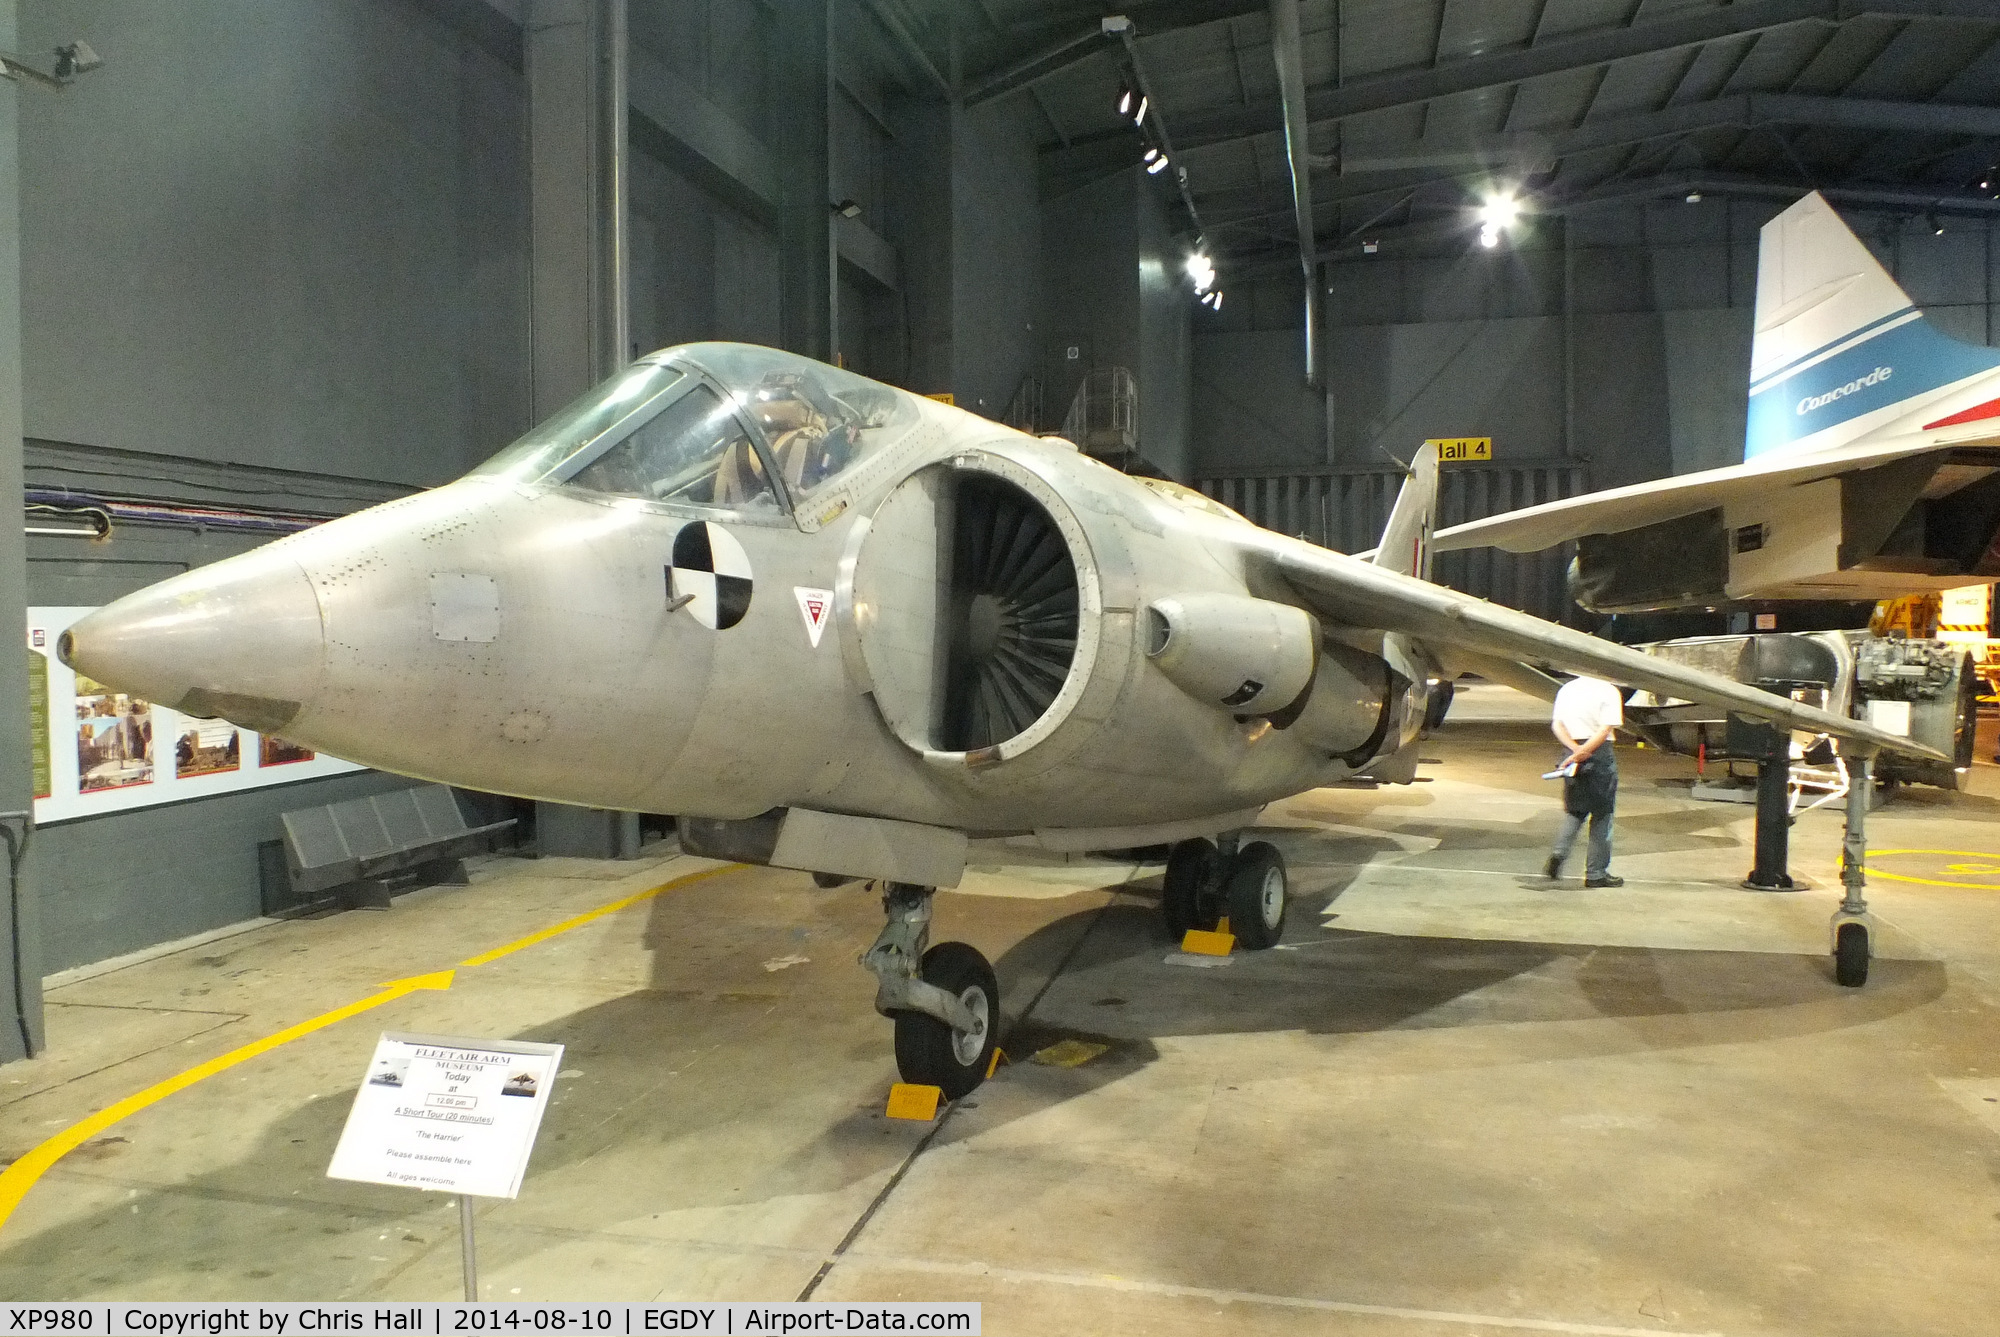 XP980, Hawker Siddeley P.1127 C/N P-05, at the FAA Museum, Yeovilton